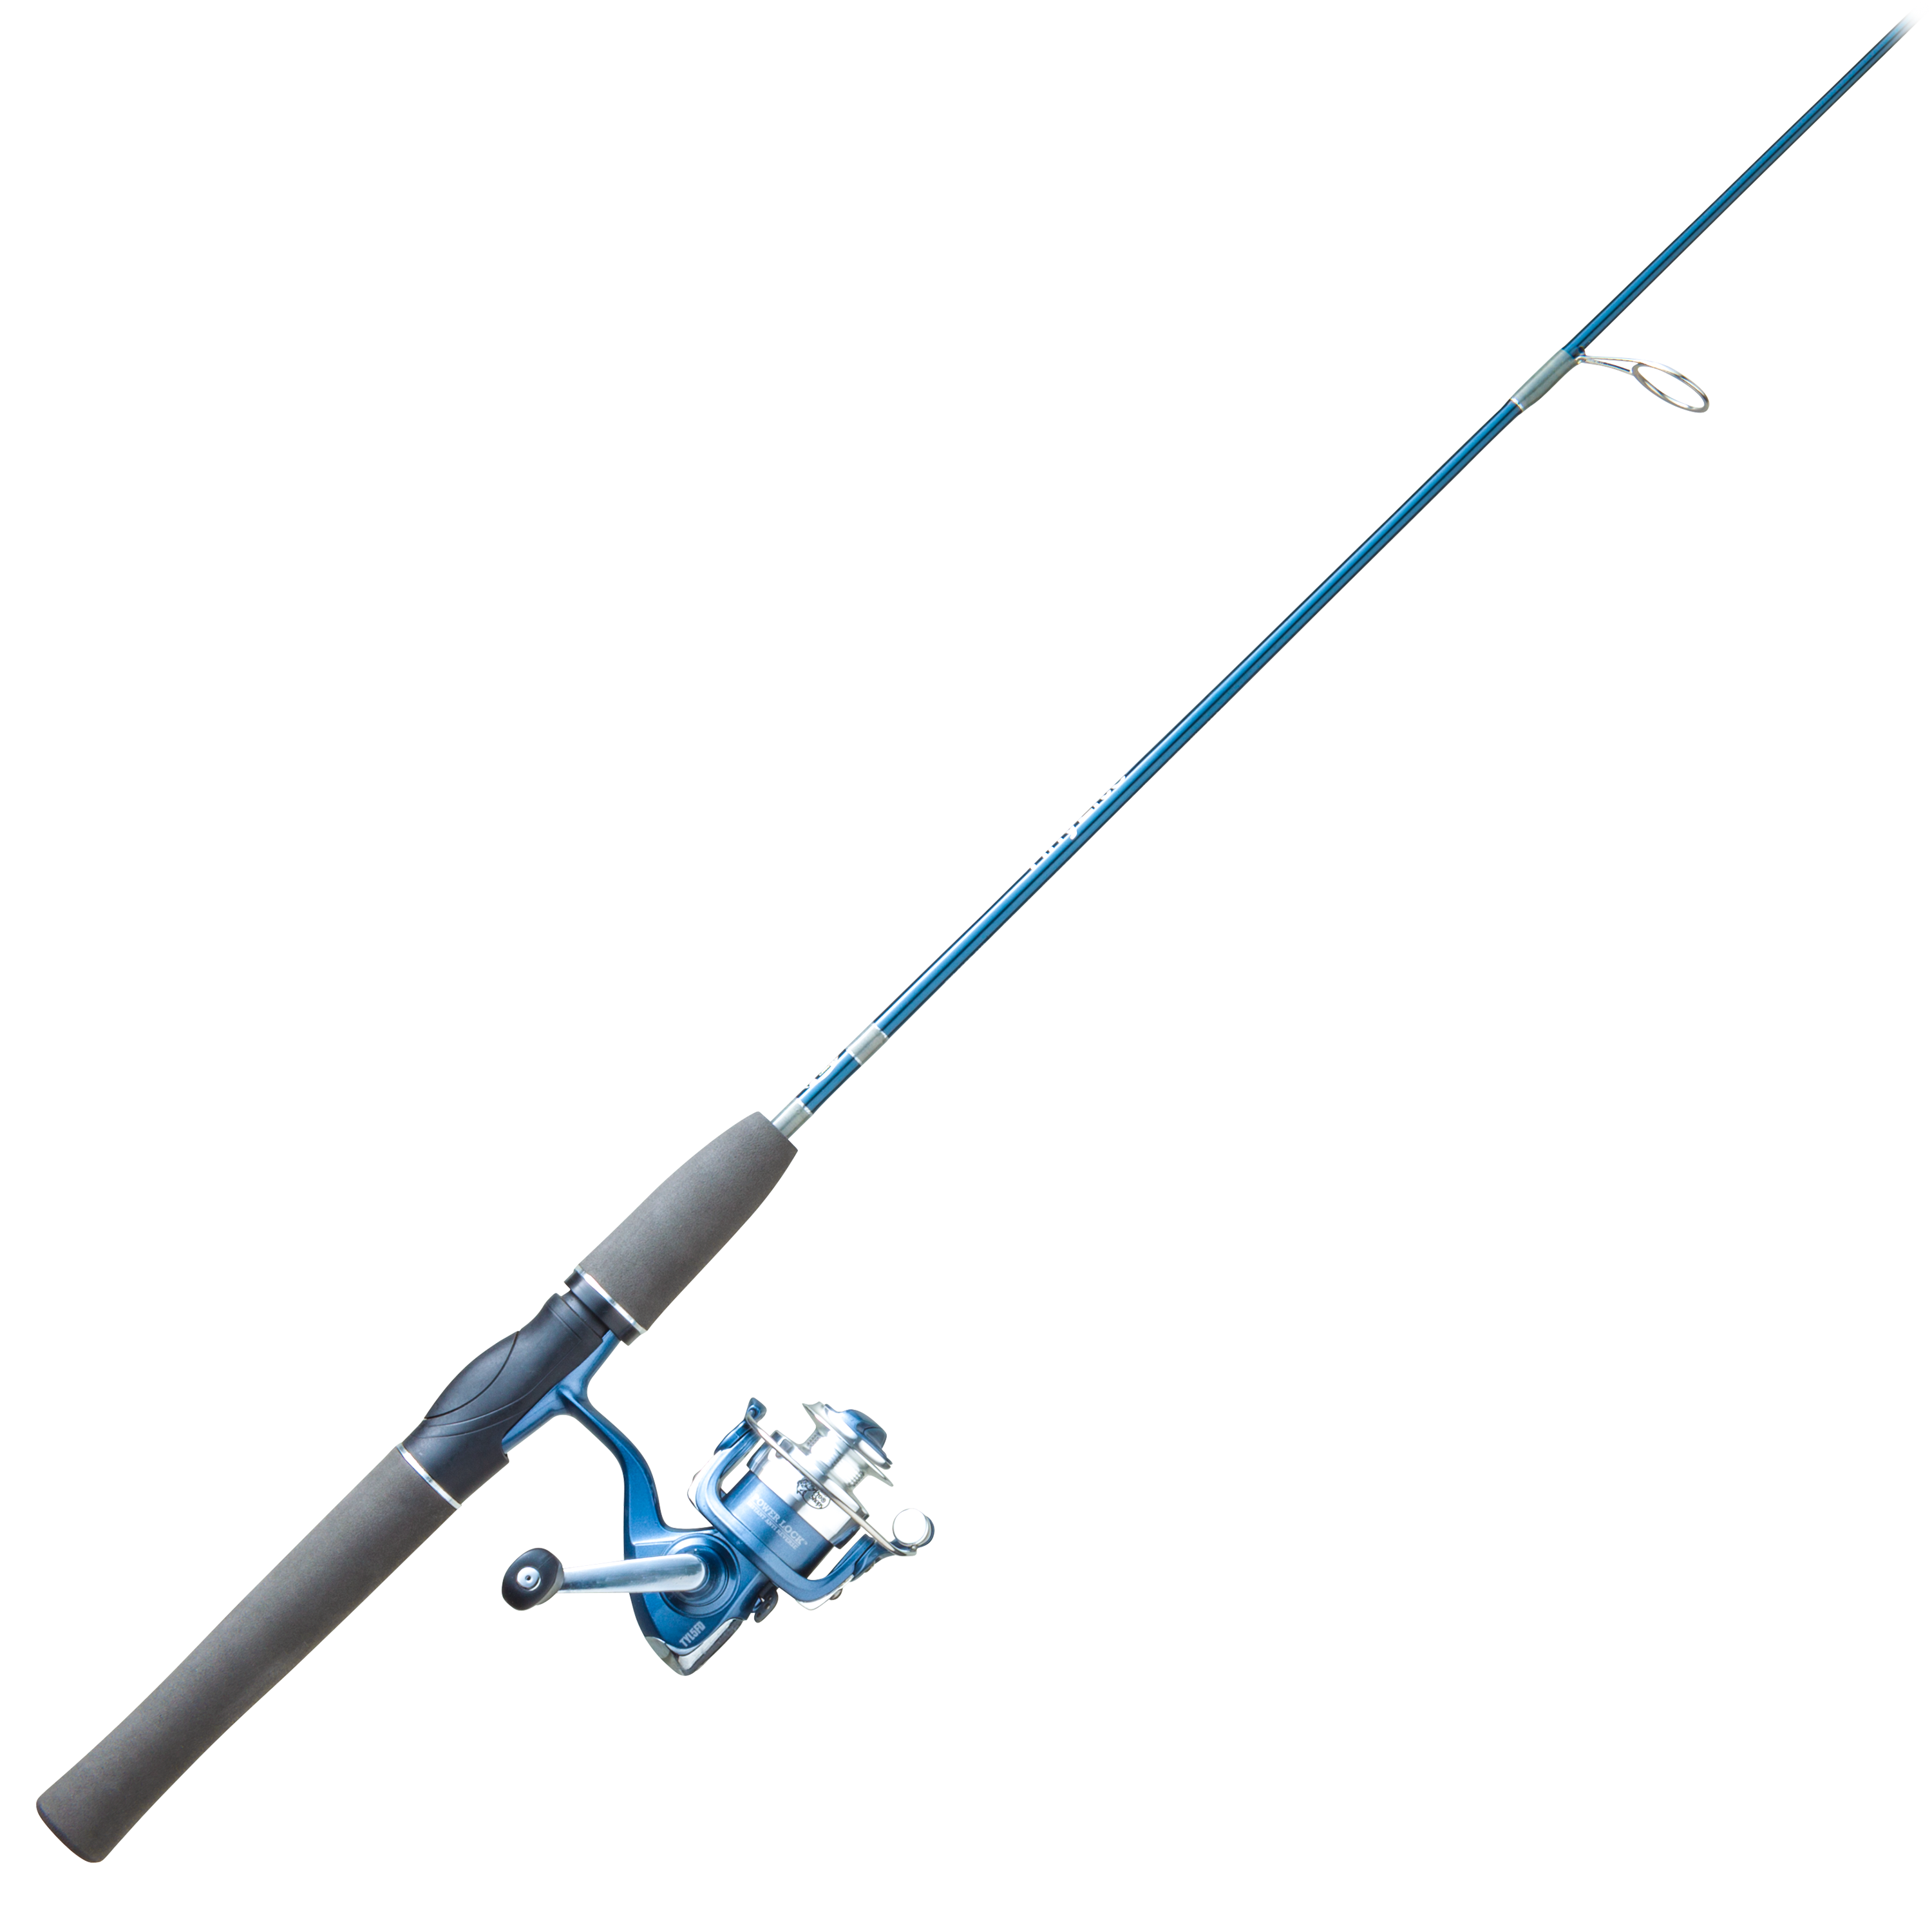 New rod, the crappie maxx 5'6 from bass pro shops. : r/Fishing_Gear